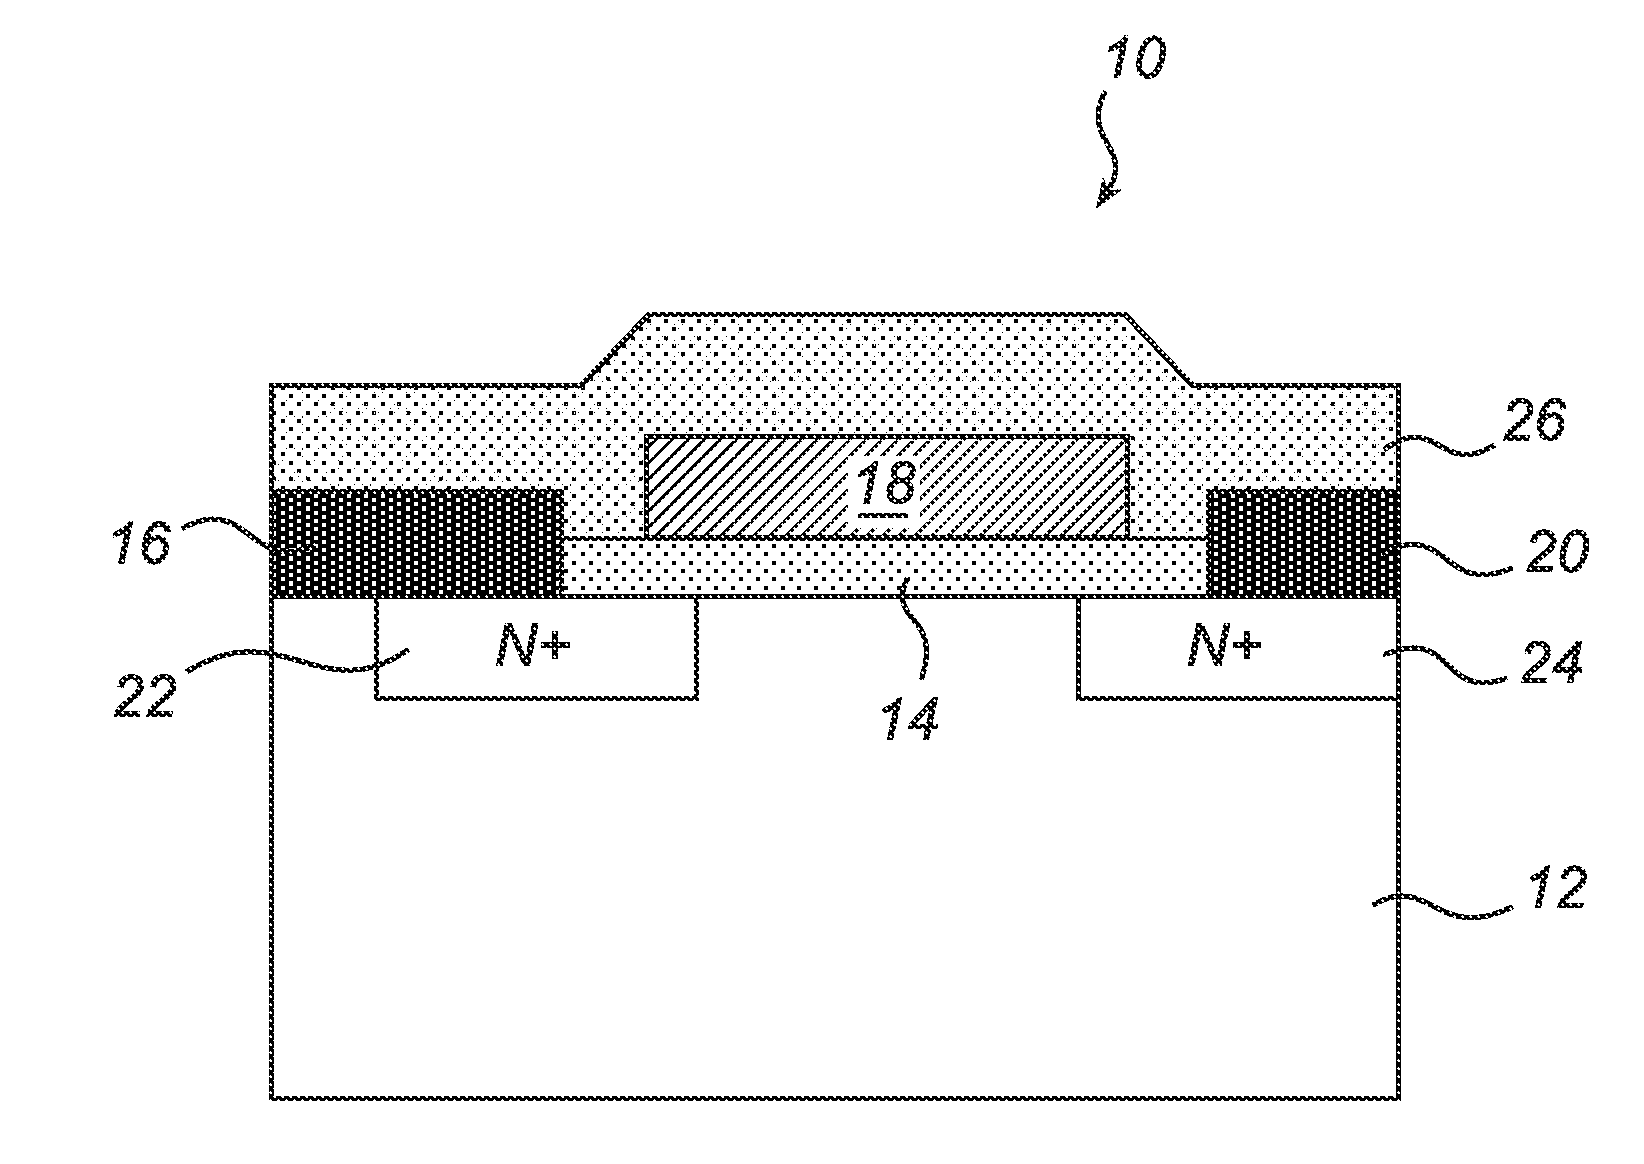 Method for improving inversion layer mobility in a silicon carbide mosfet